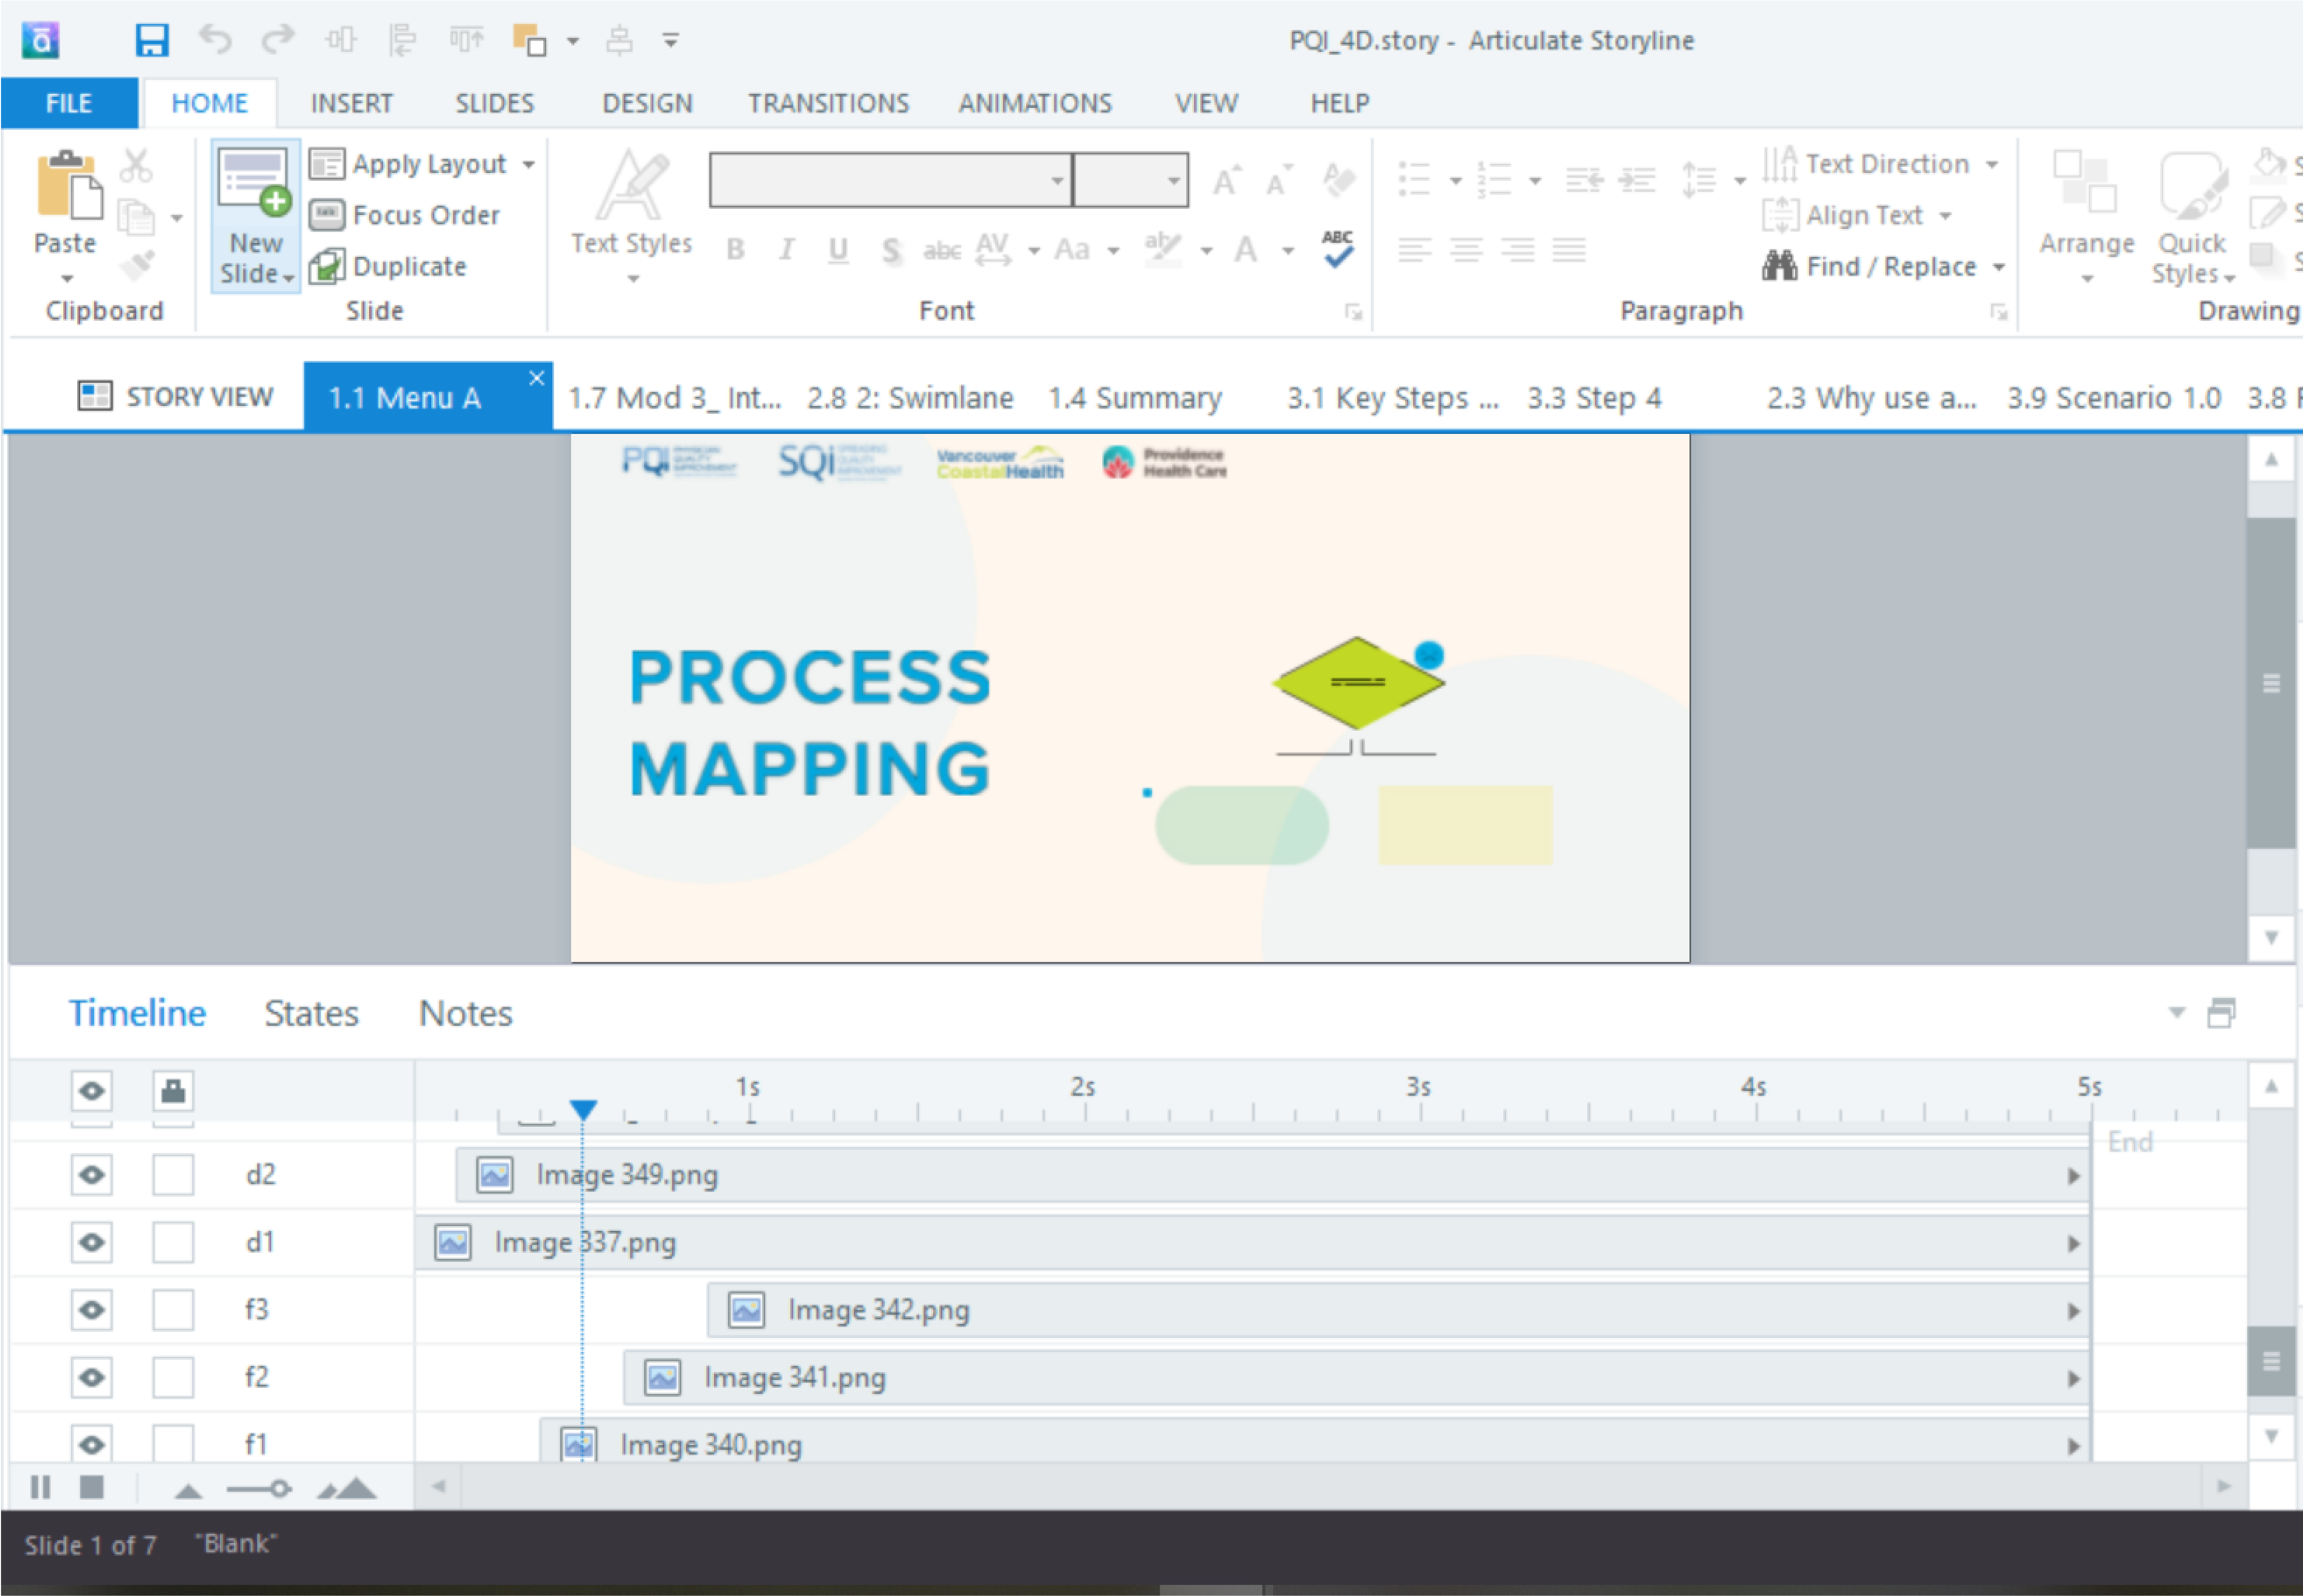 Screenshot of timeline and graphics in Storyline